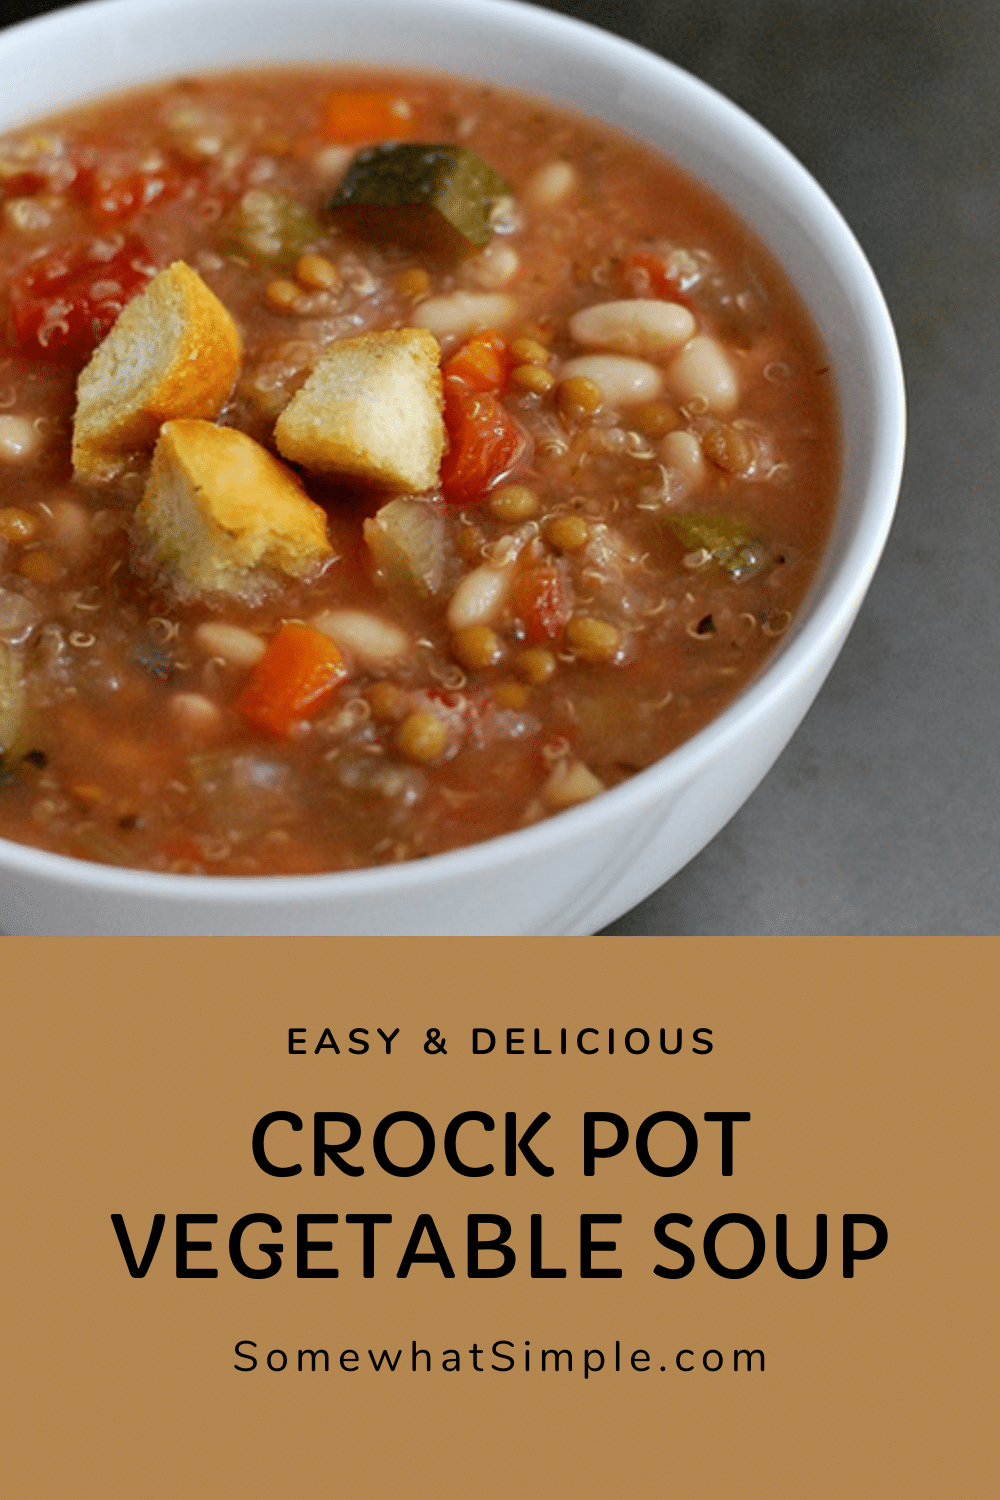 Crock pot vegetable soup is a hearty recipe that's incredibly easy to make. Loaded with your favorite vegetables, it's both healthy and delicious! Just place all of the ingredients in the slow cooker and you're all set. via @somewhatsimple